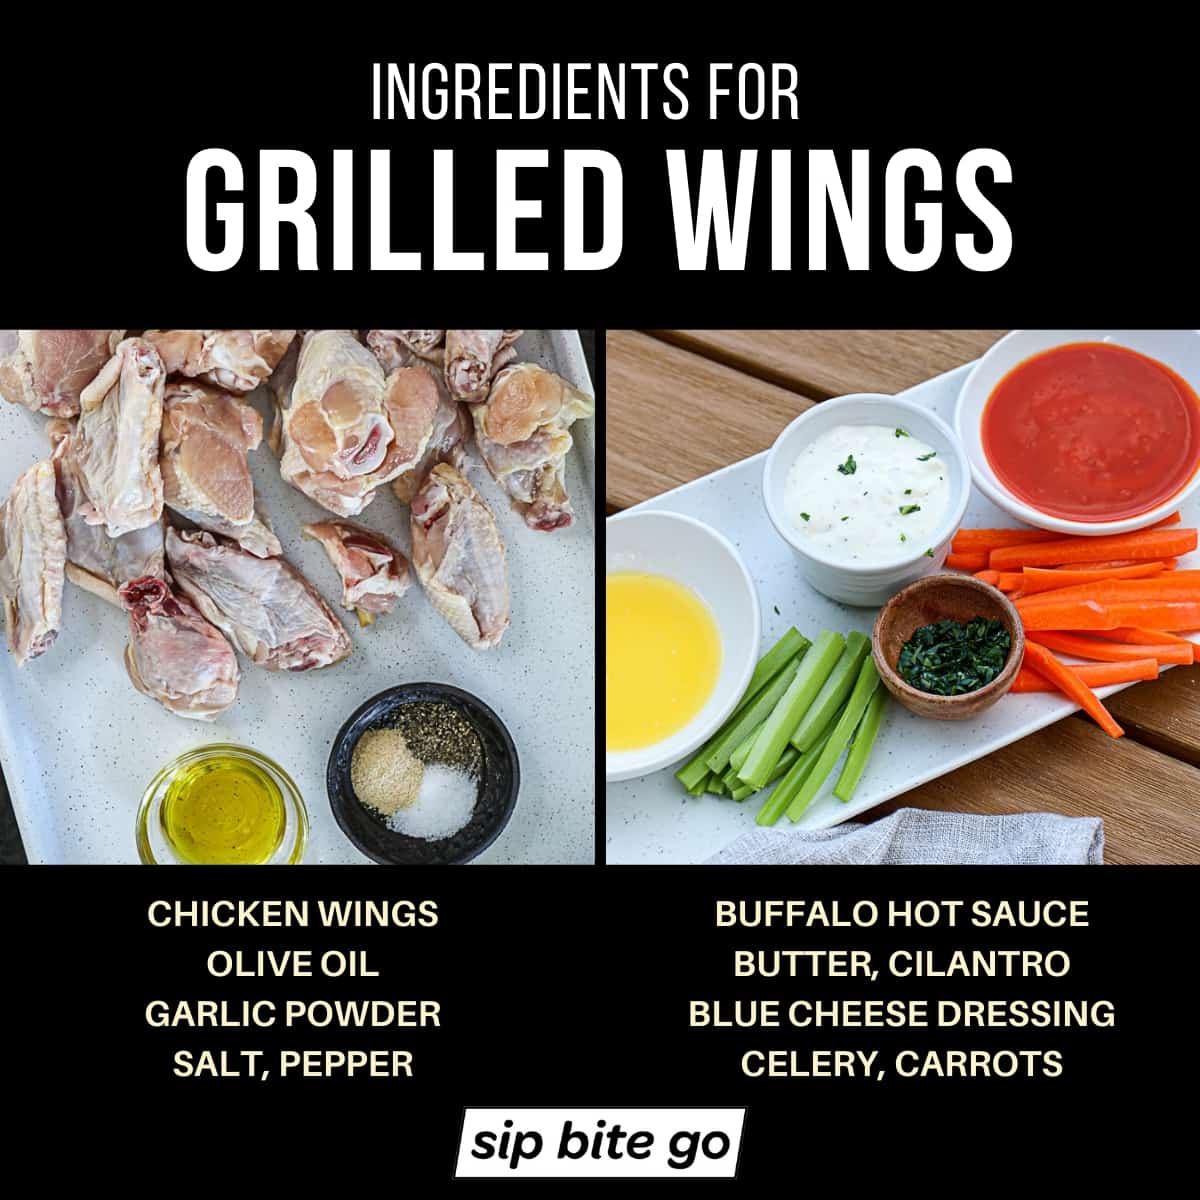 Ingredients for grilled chicken wings with buffalo hot sauce.